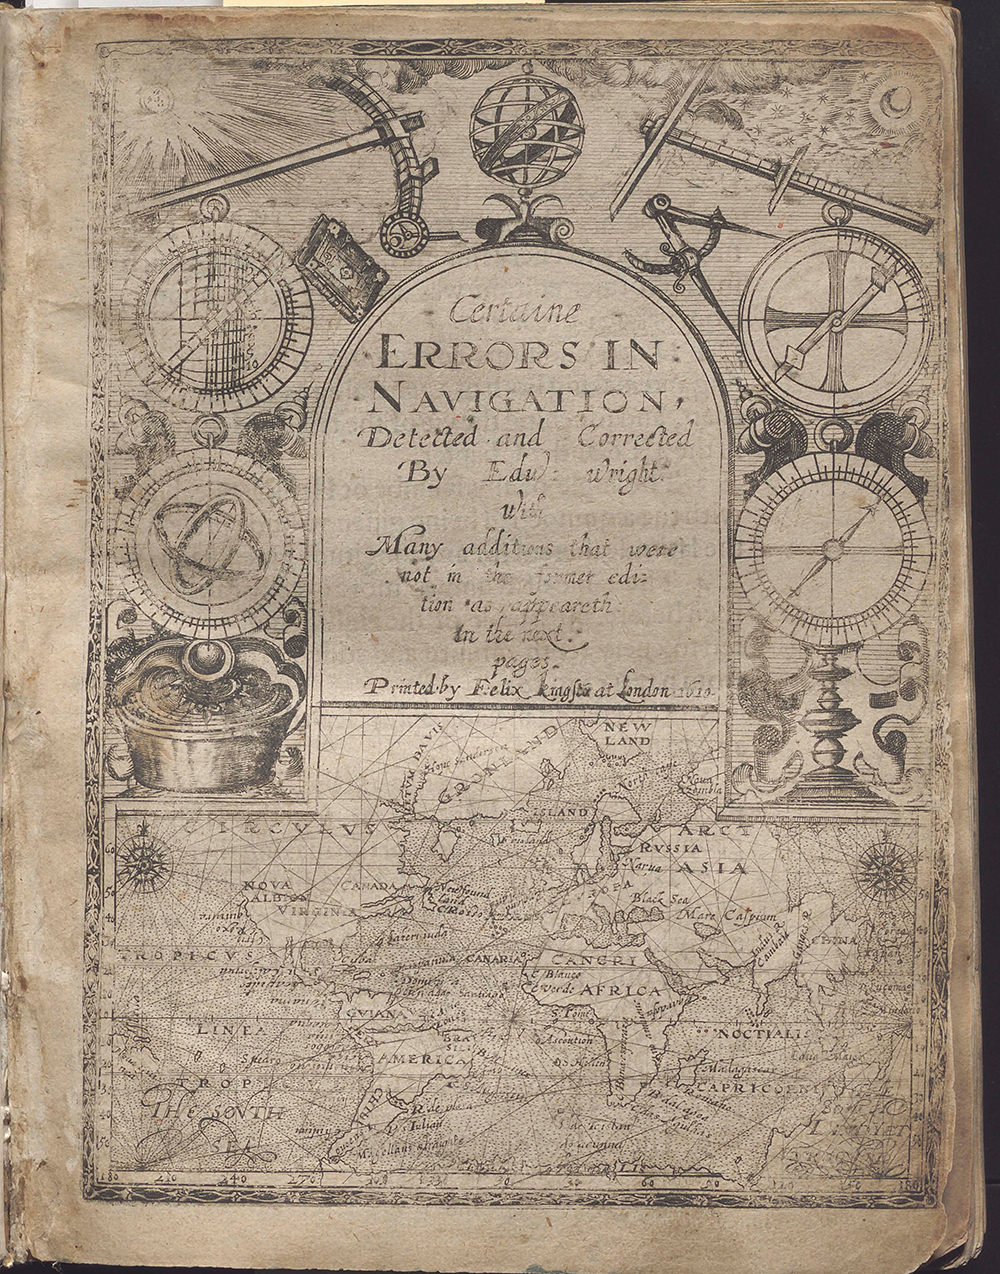 A scan from “Certaine errors in navigation, detected and corrected” by Edward Wright (1558?–1615), an addition to the Paul Chrzanowski Collection at UCLA’s William Andrews Clark Memorial Library.